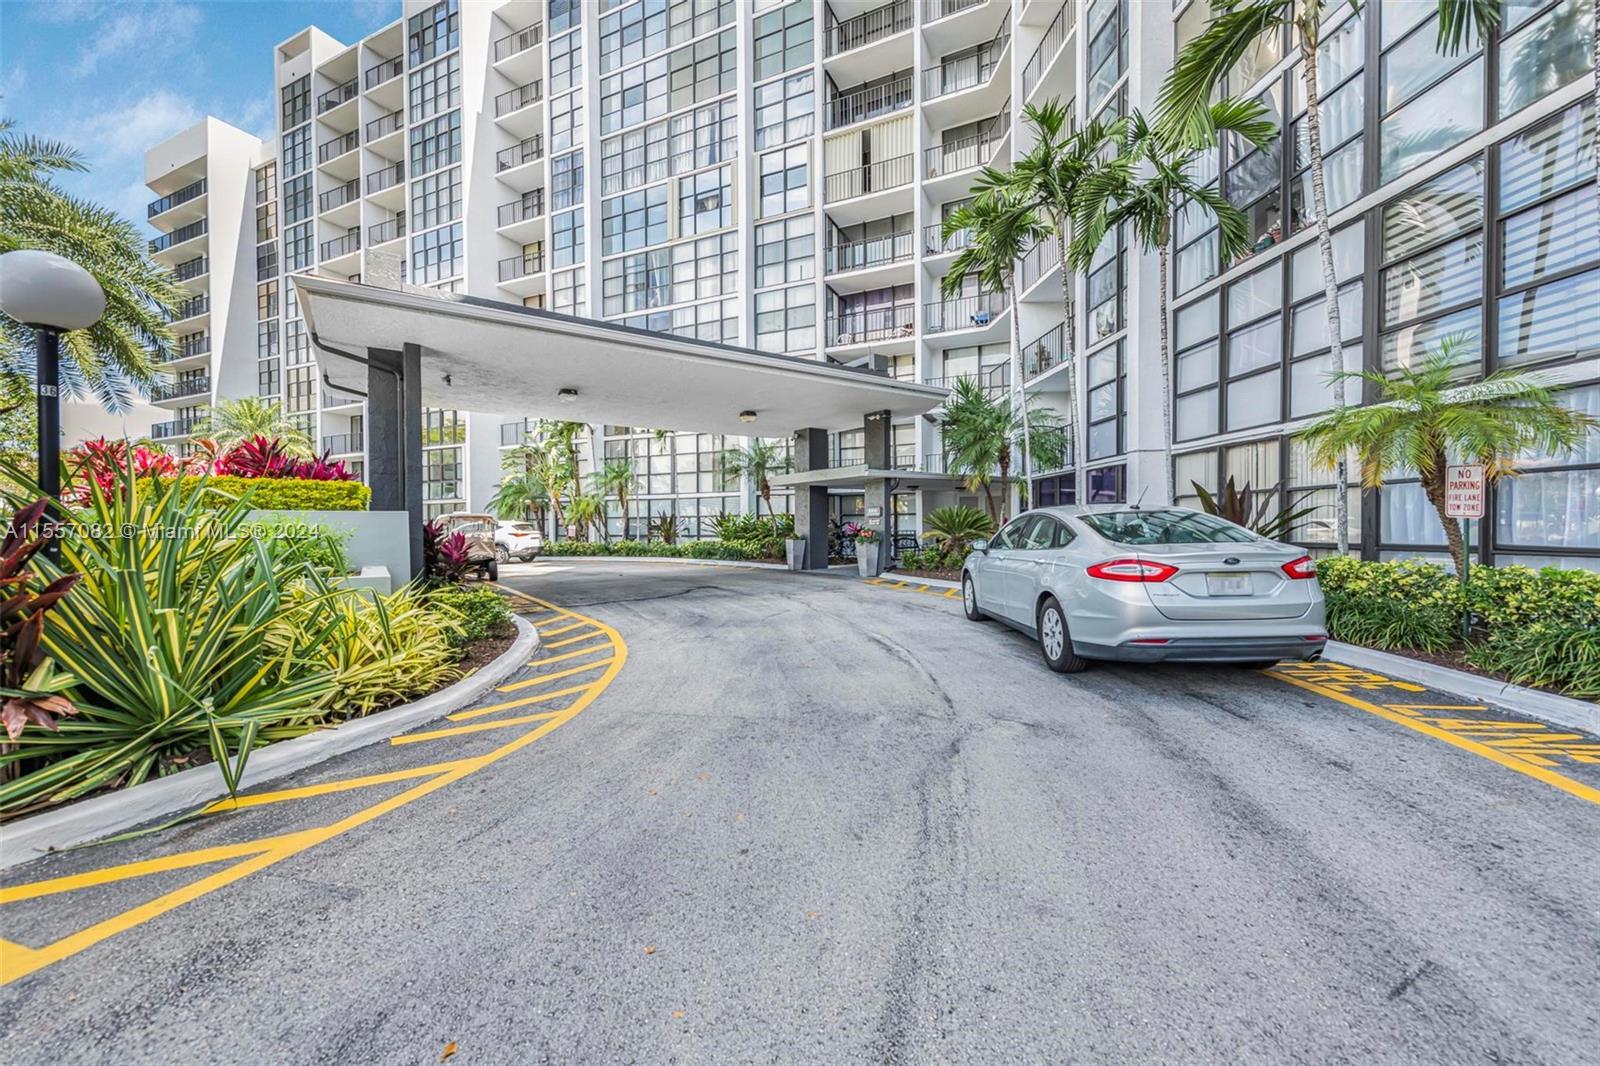 Photo of 1000 Parkview Dr #120 in Hallandale Beach, FL